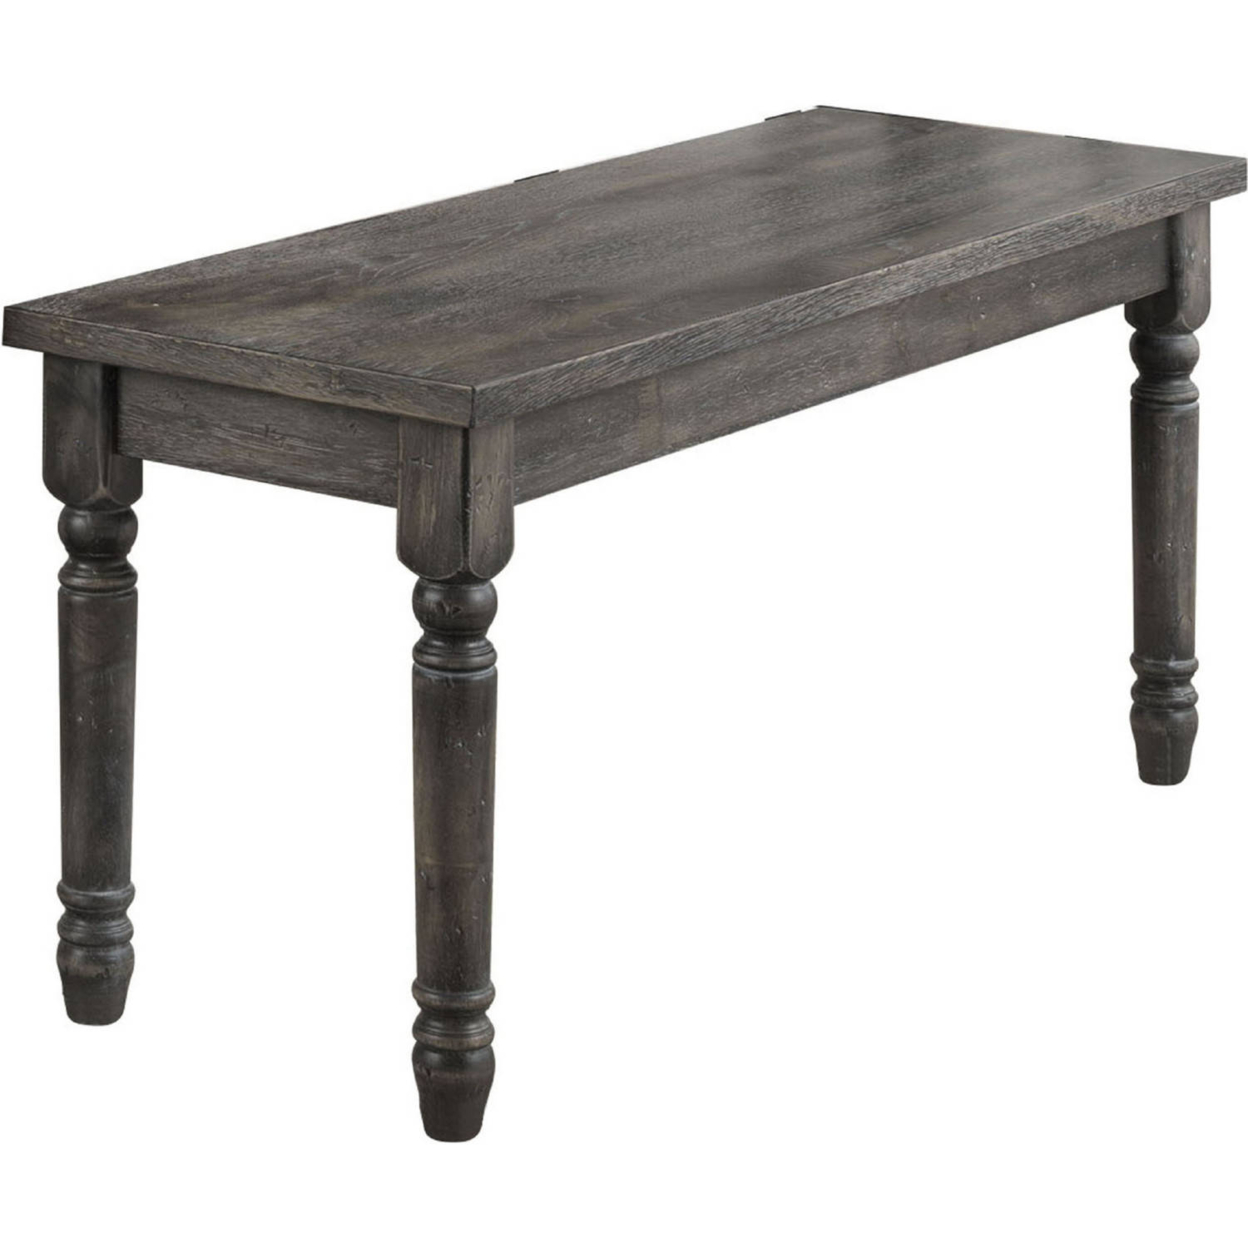 Transitional Style Wood Bench With Turned Legs, Gray- Saltoro Sherpi